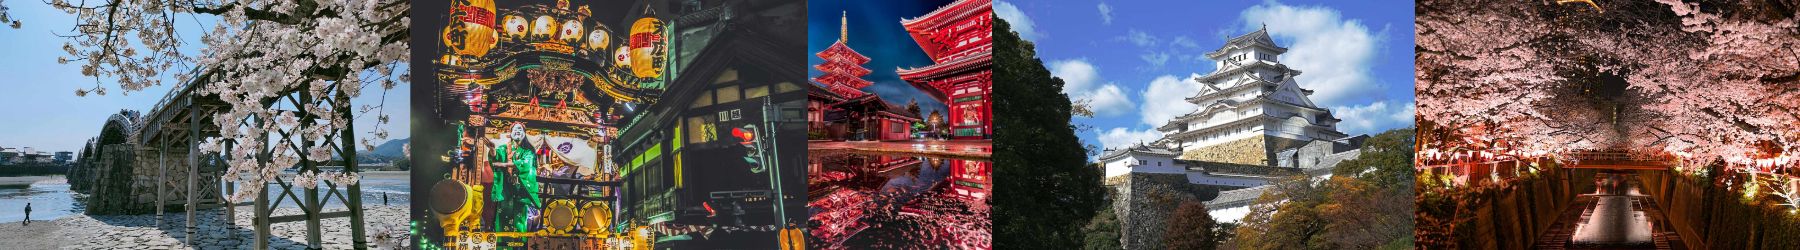 Japanese sightseeing spots recommended by e-travel2